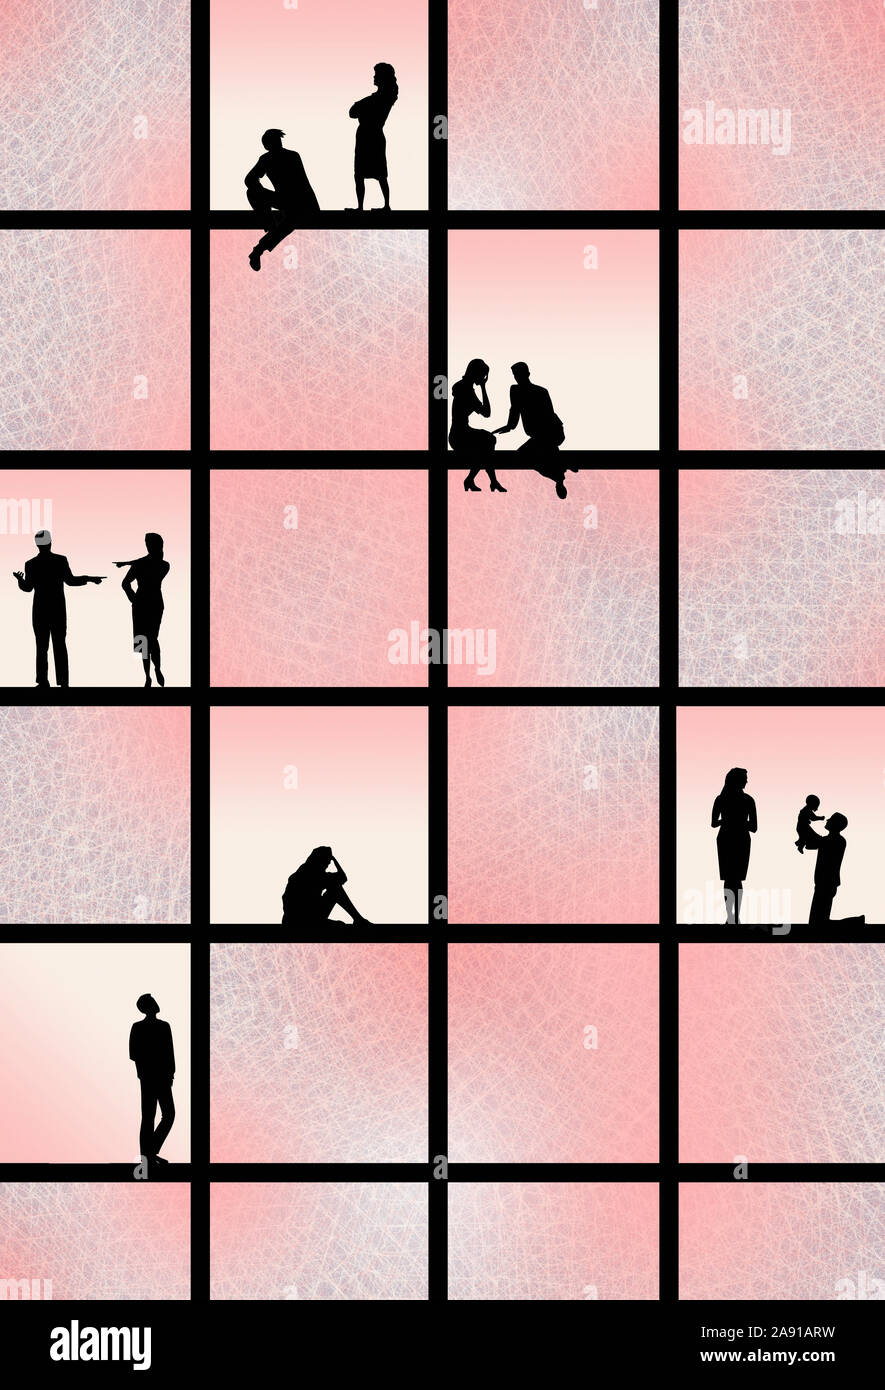 Scenes of relationships silhouetted in window panes Stock Photo